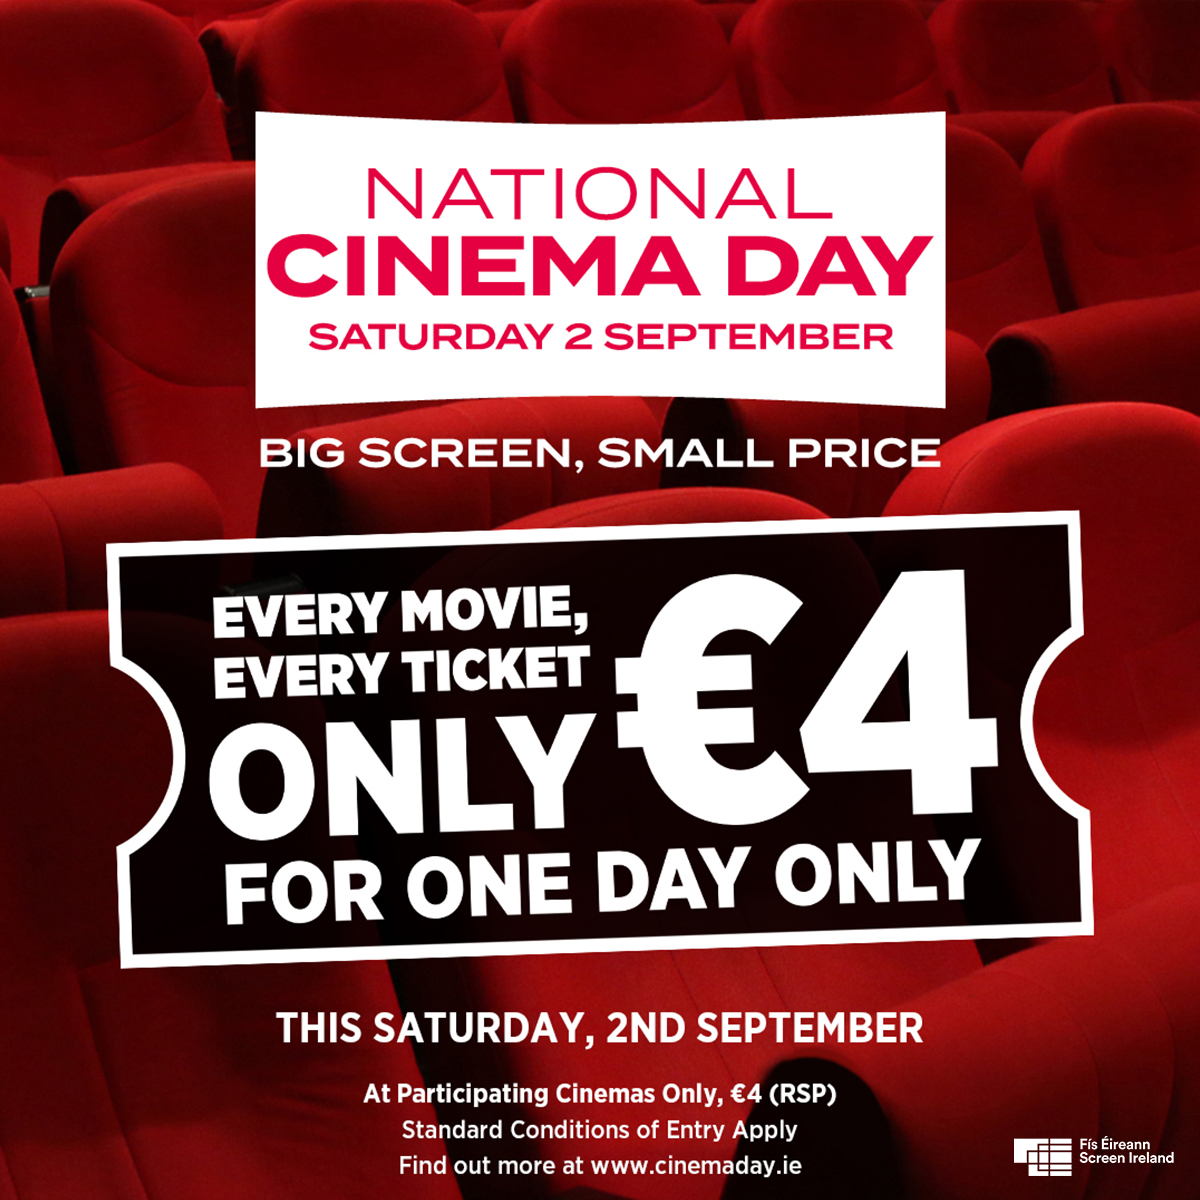 🎉 Join us on September 2 for National Cinema Day and snag your tickets for only €4 all day! 🍿 They'll sell like hotcakes once on sale. 😱 Get ready to experience the magic of the big screen at a price that'll make you jump with joy! 💃✨ #NationalCinemaDay #MovieMadness